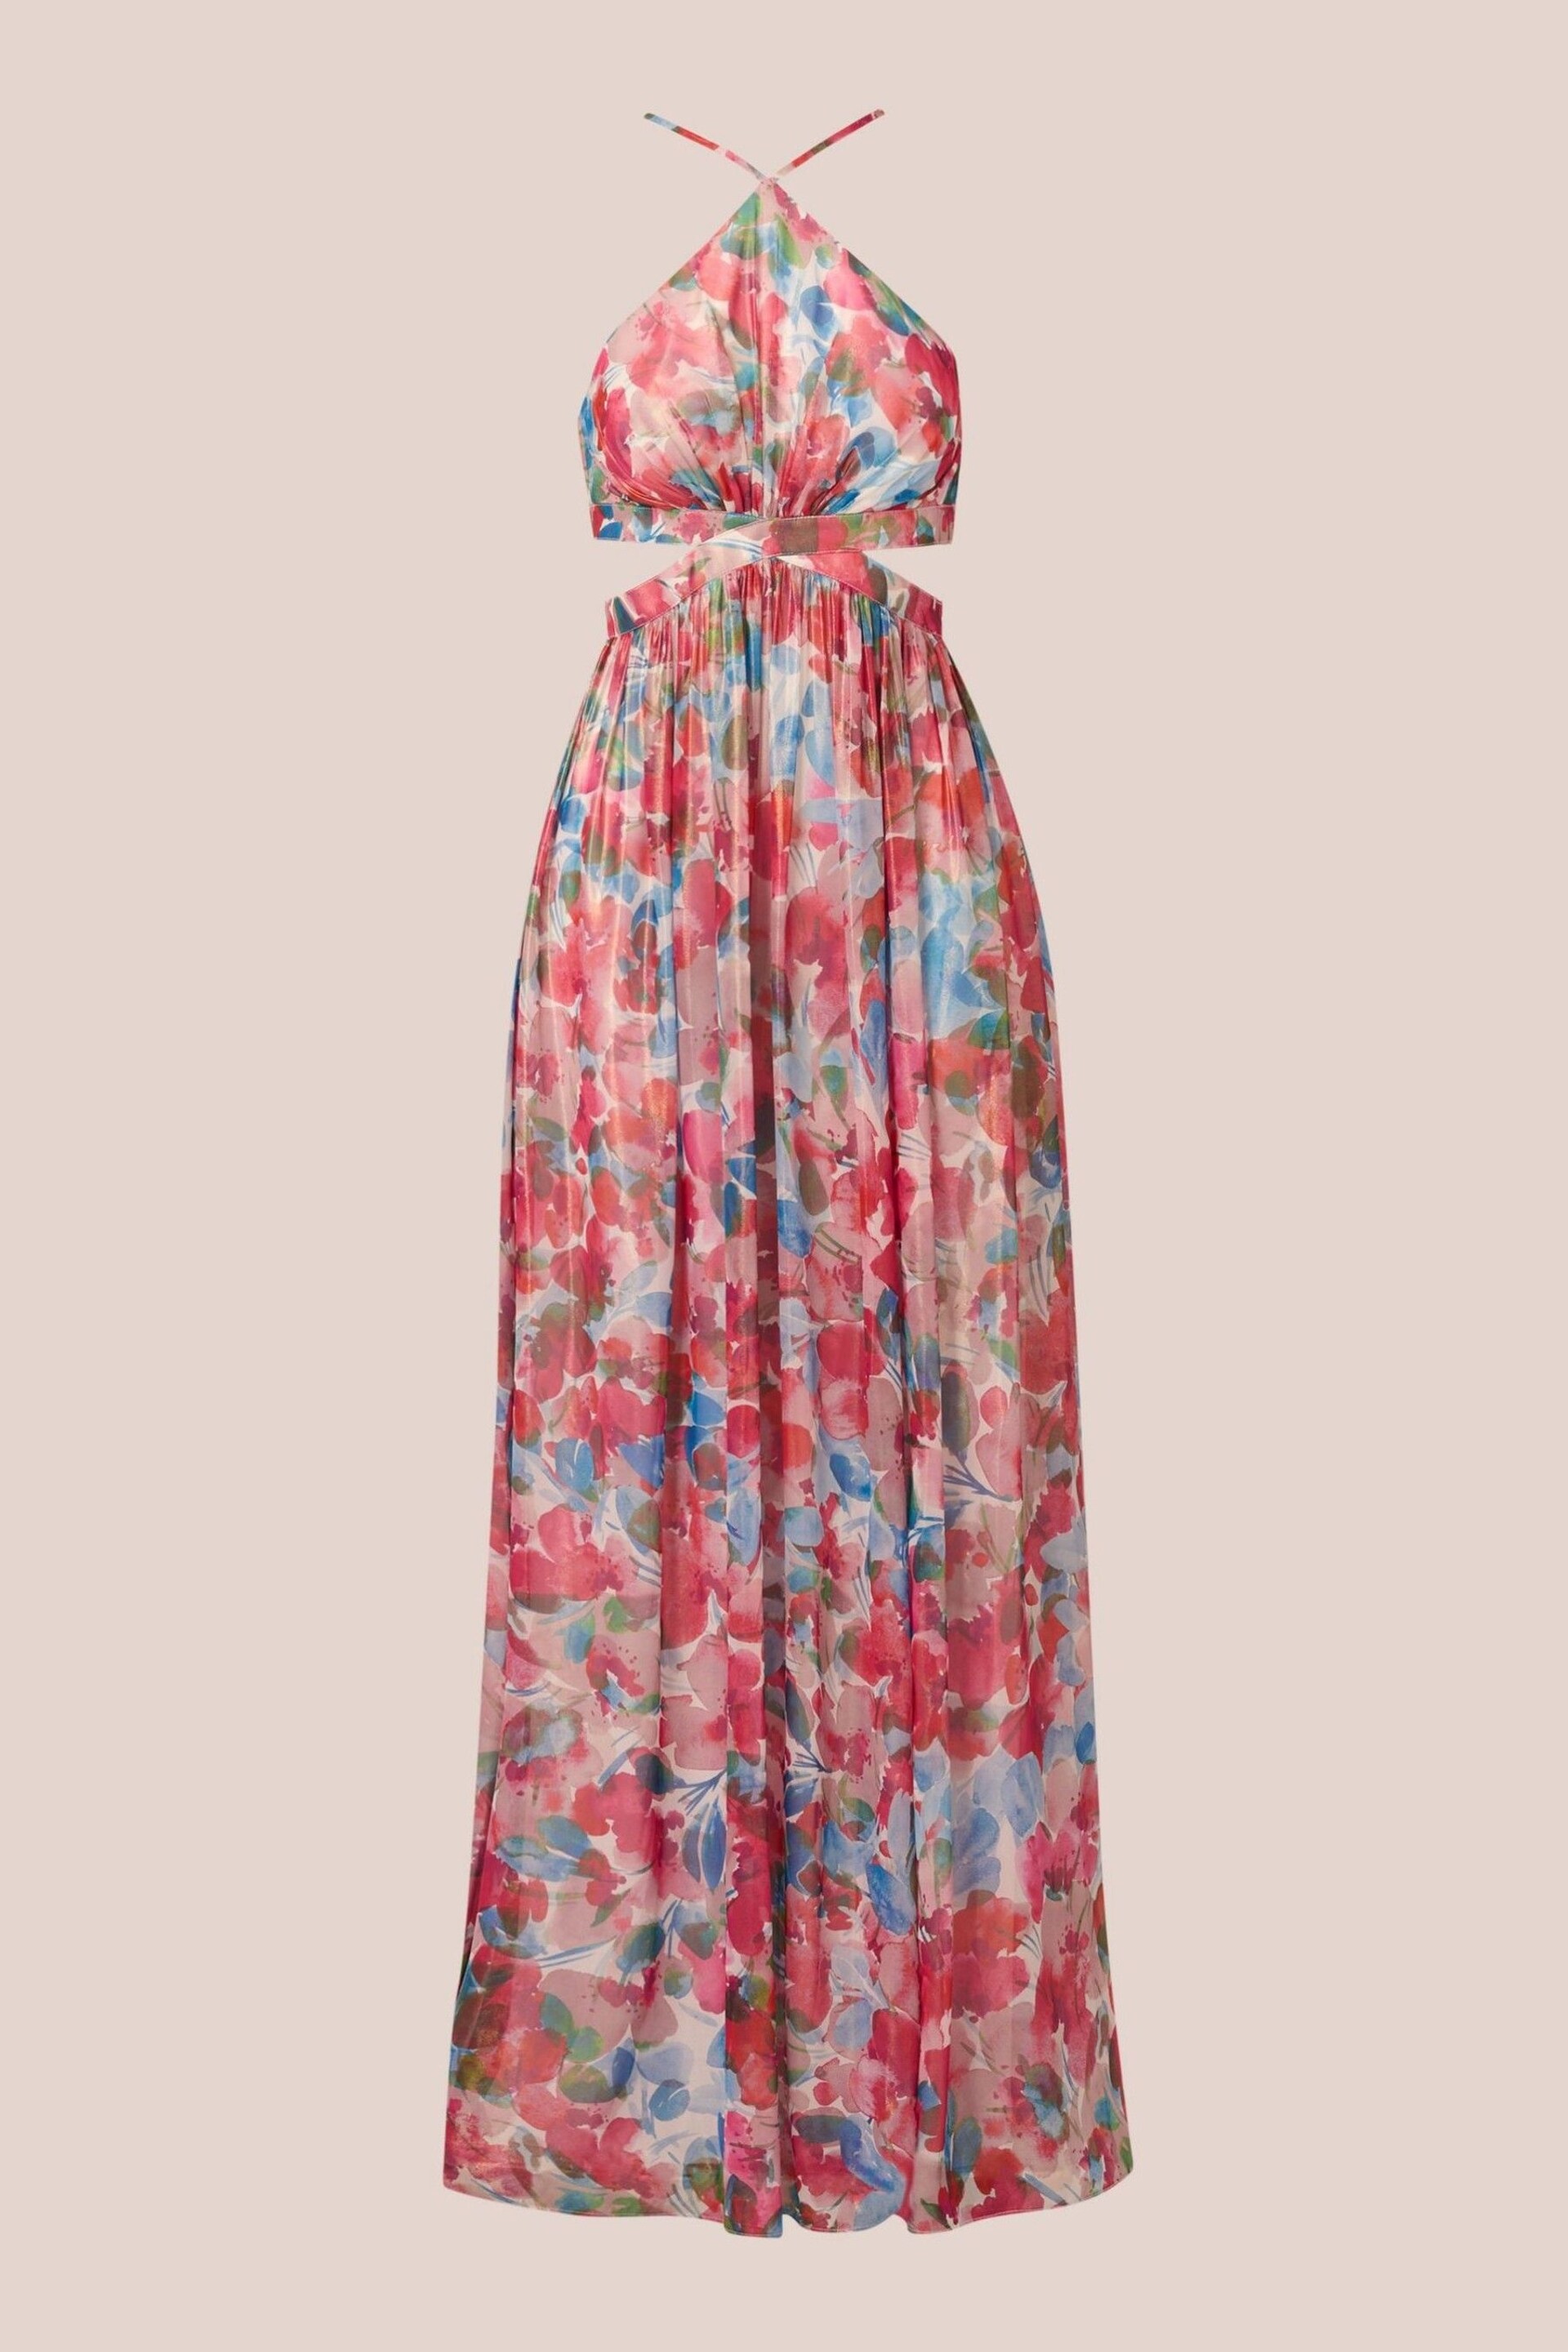 Adrianna Papell Pink Foiled Chiffon Maxi Dress - Image 7 of 7